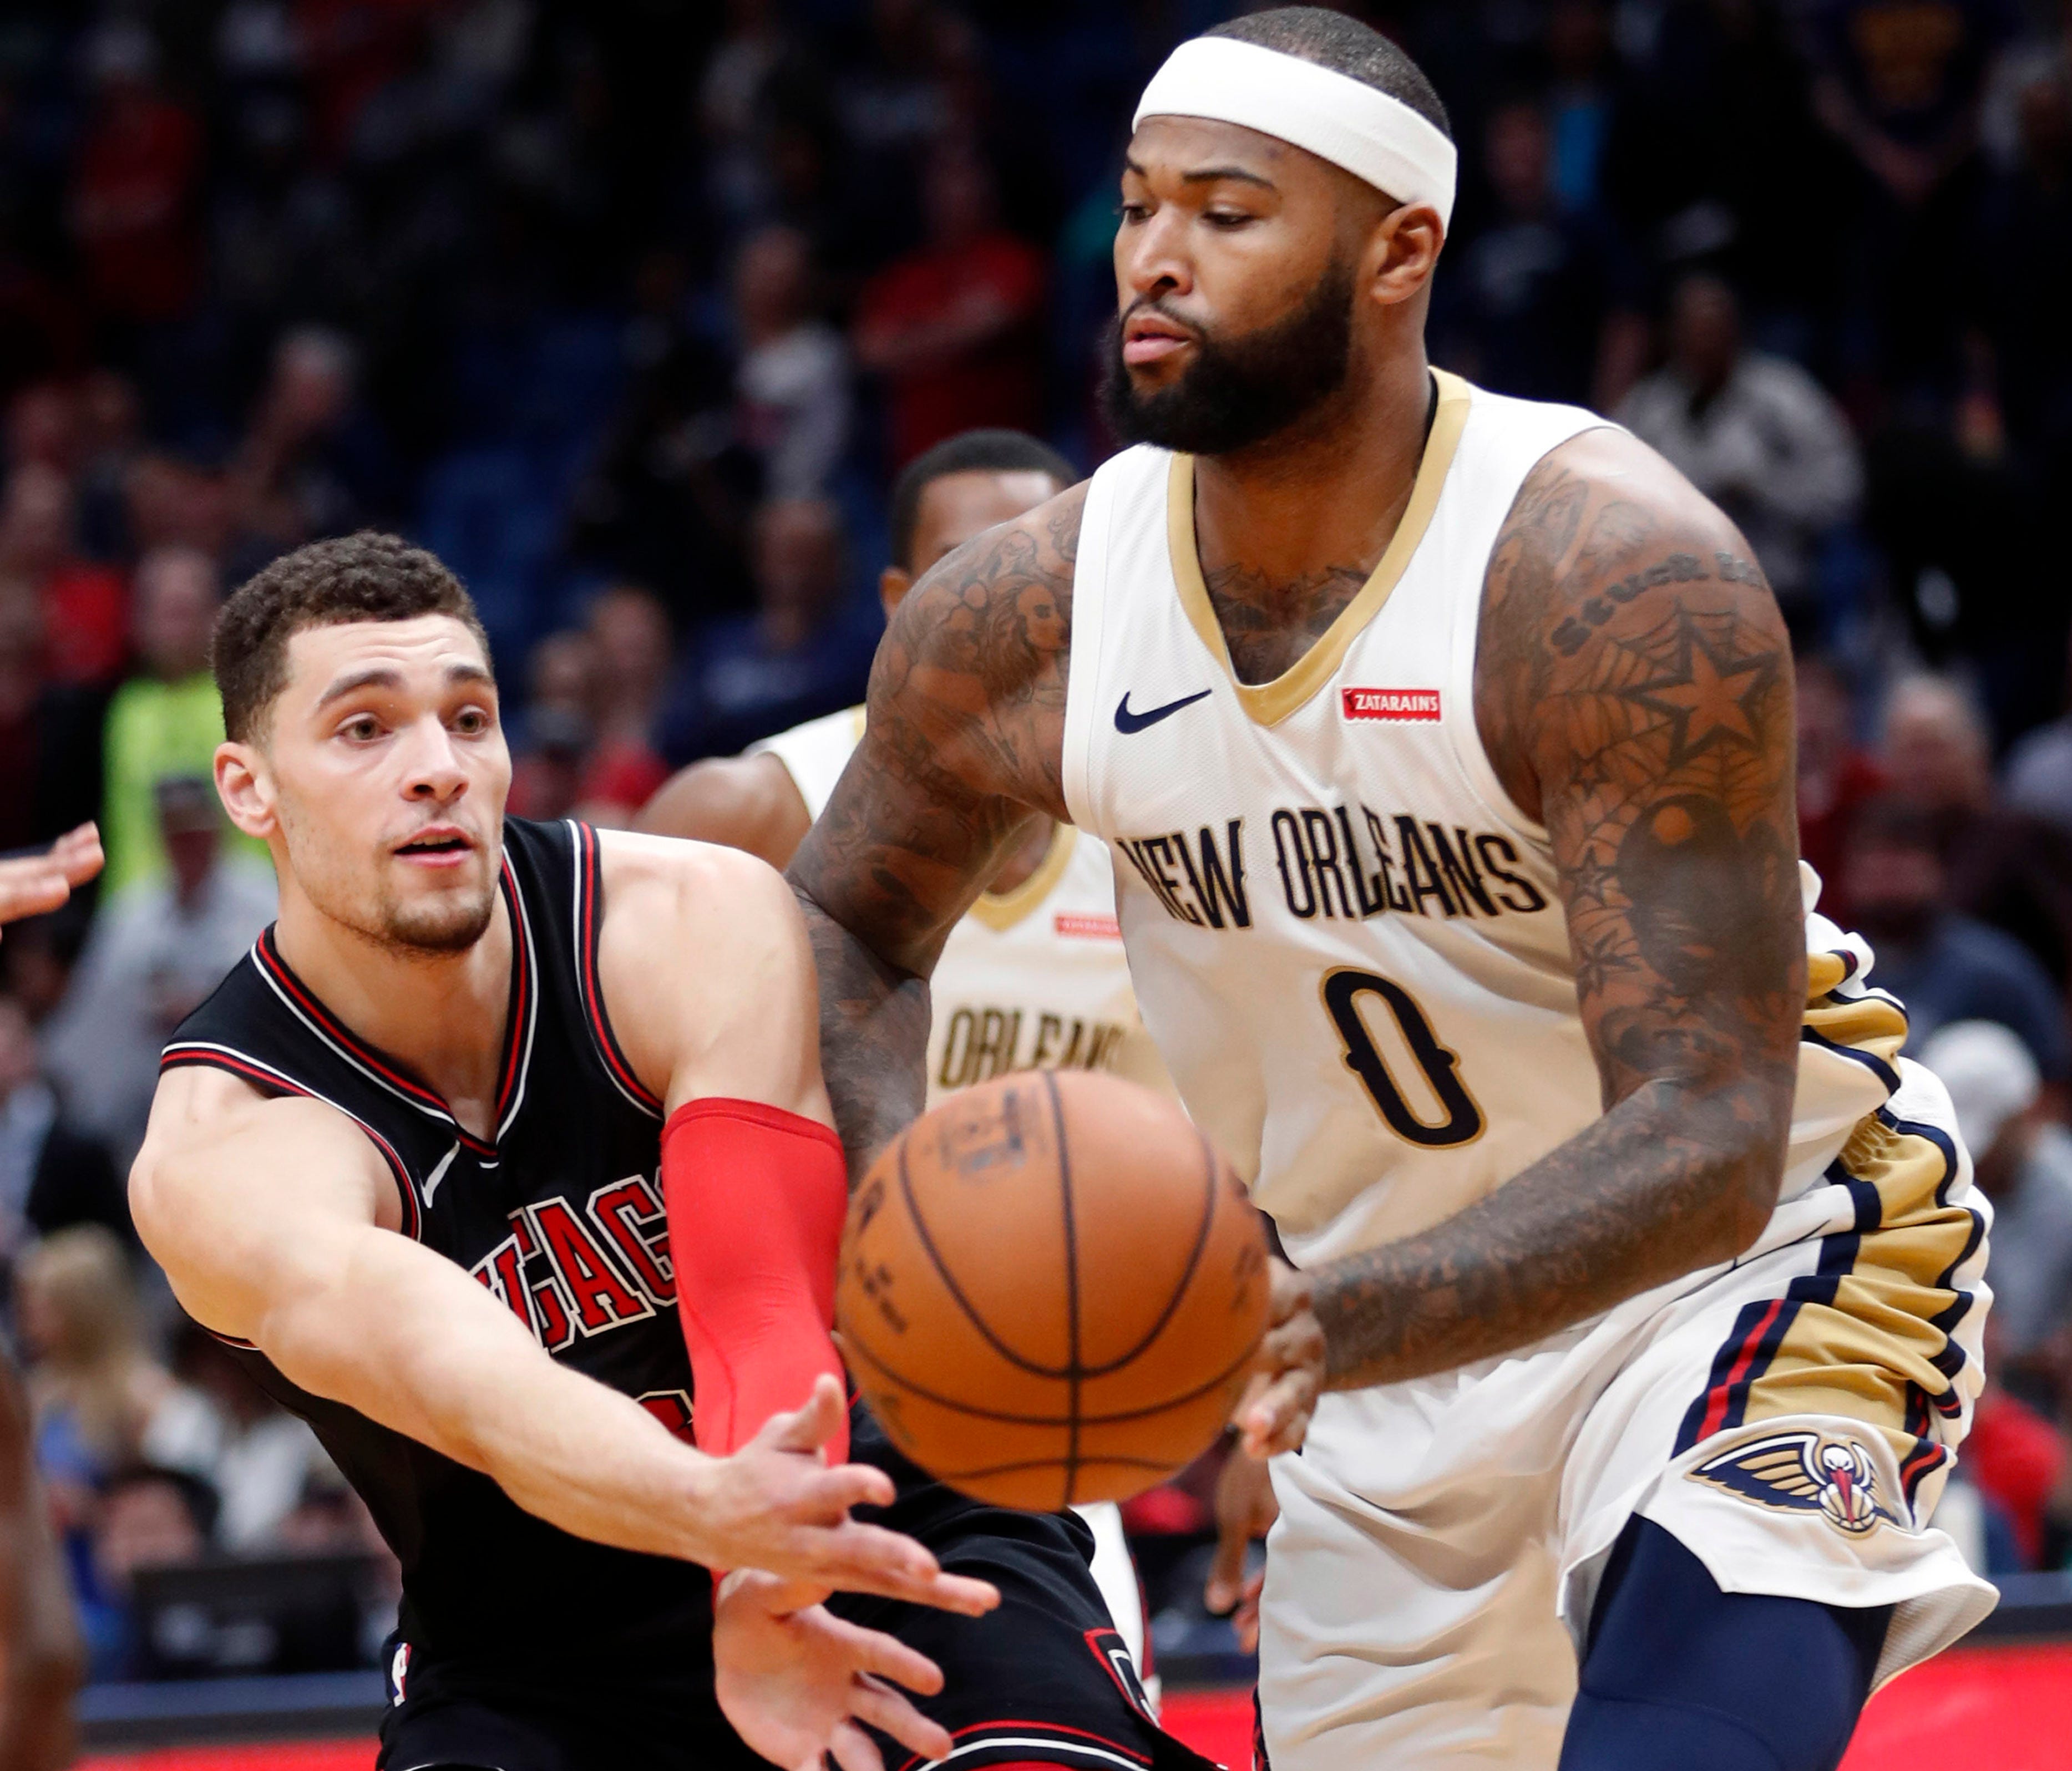 DeMarcus Cousins had a huge night against the Chicago Bulls.